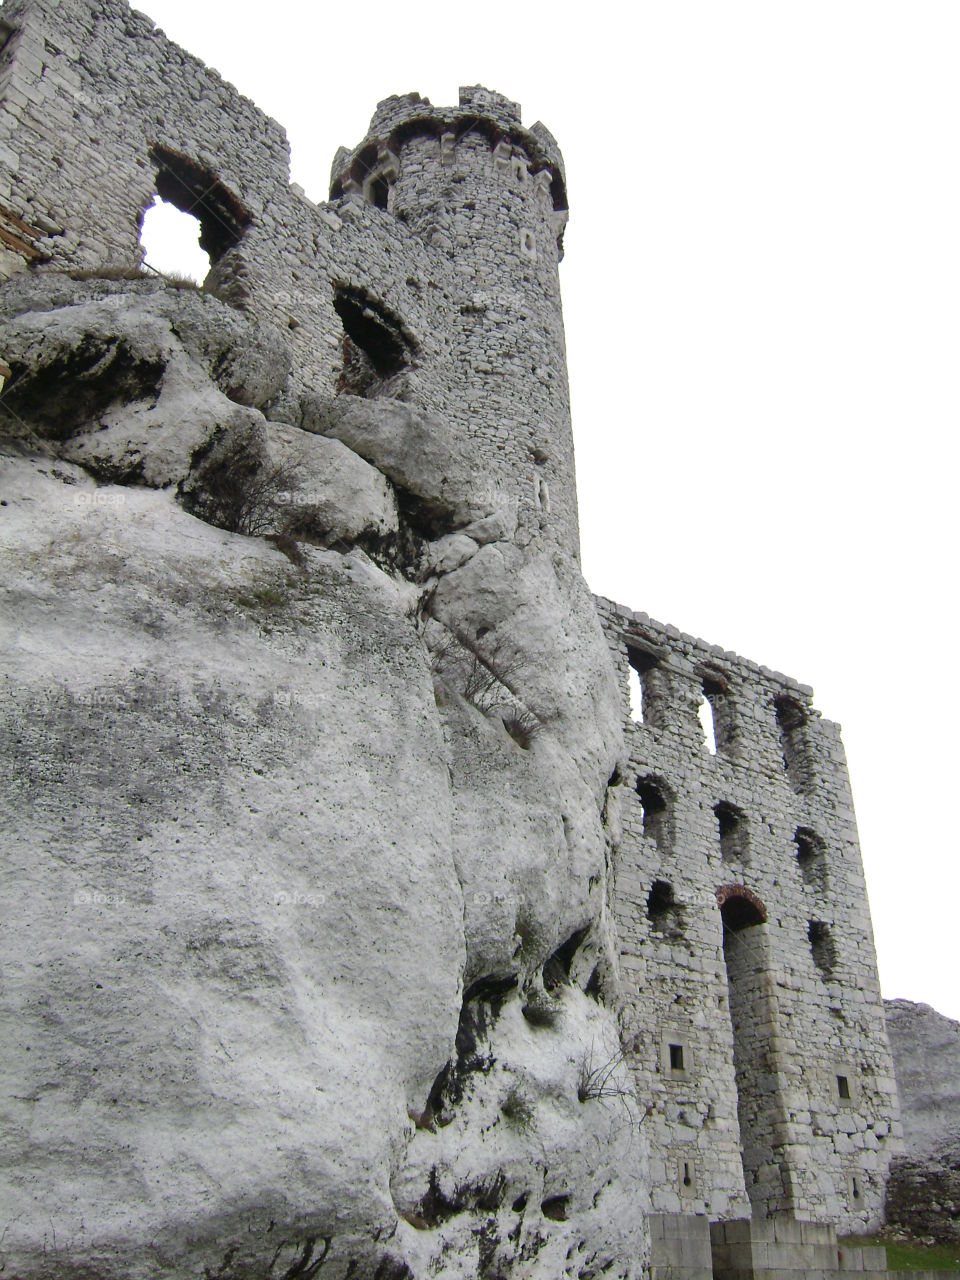 The ruins of a once majestic castle in Poland still stand at majestic heights. 